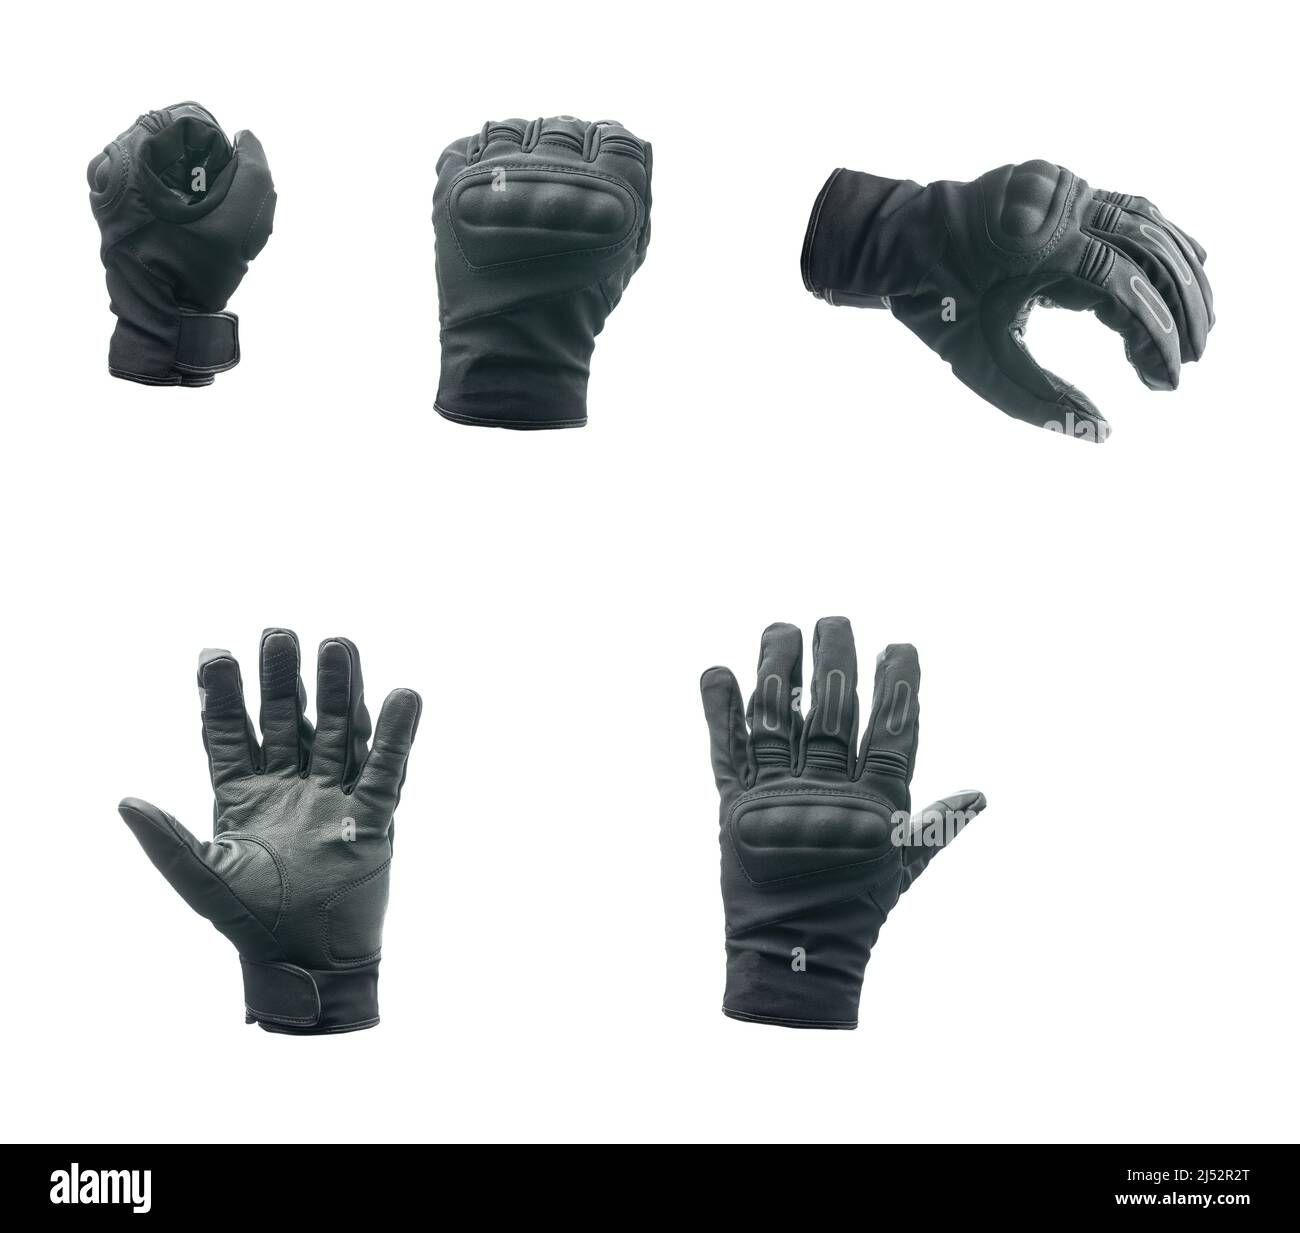 Black motorcycle gloves isolated on a white background. Stock Photo